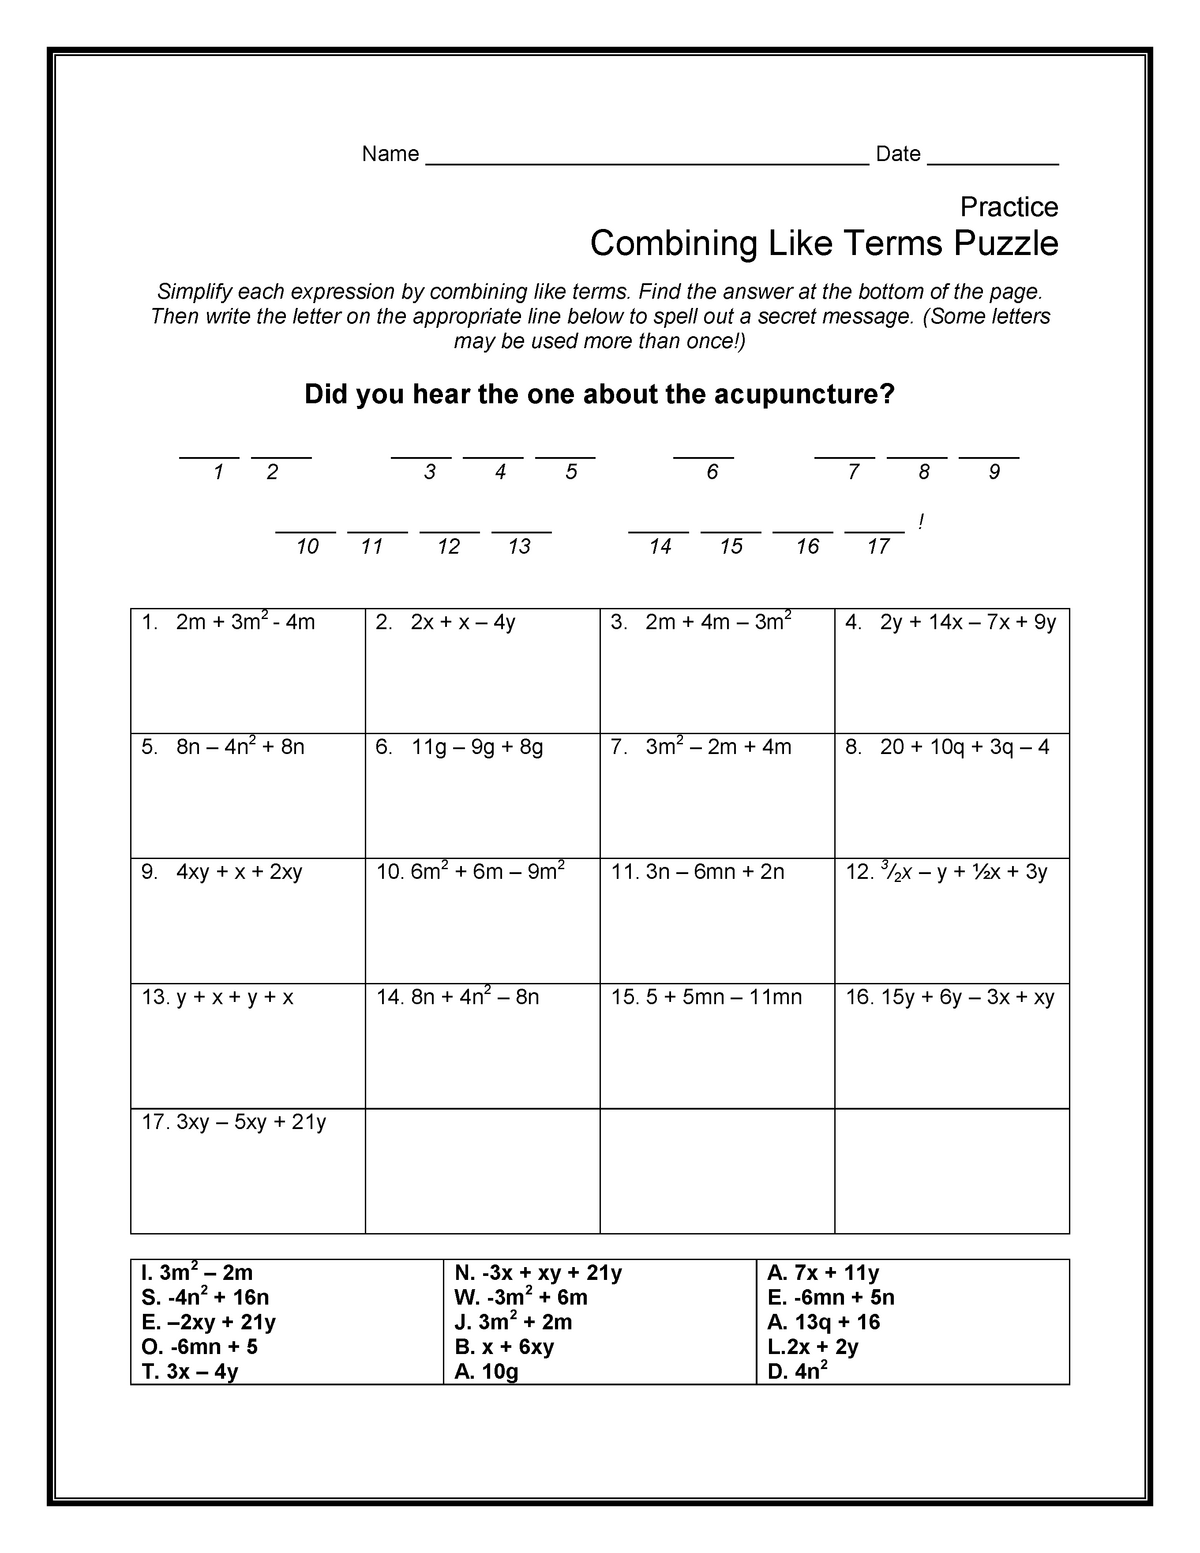 20 - Combining Like Terms Puzzle - Name Date ______ - StuDocu For Combining Like Terms Practice Worksheet